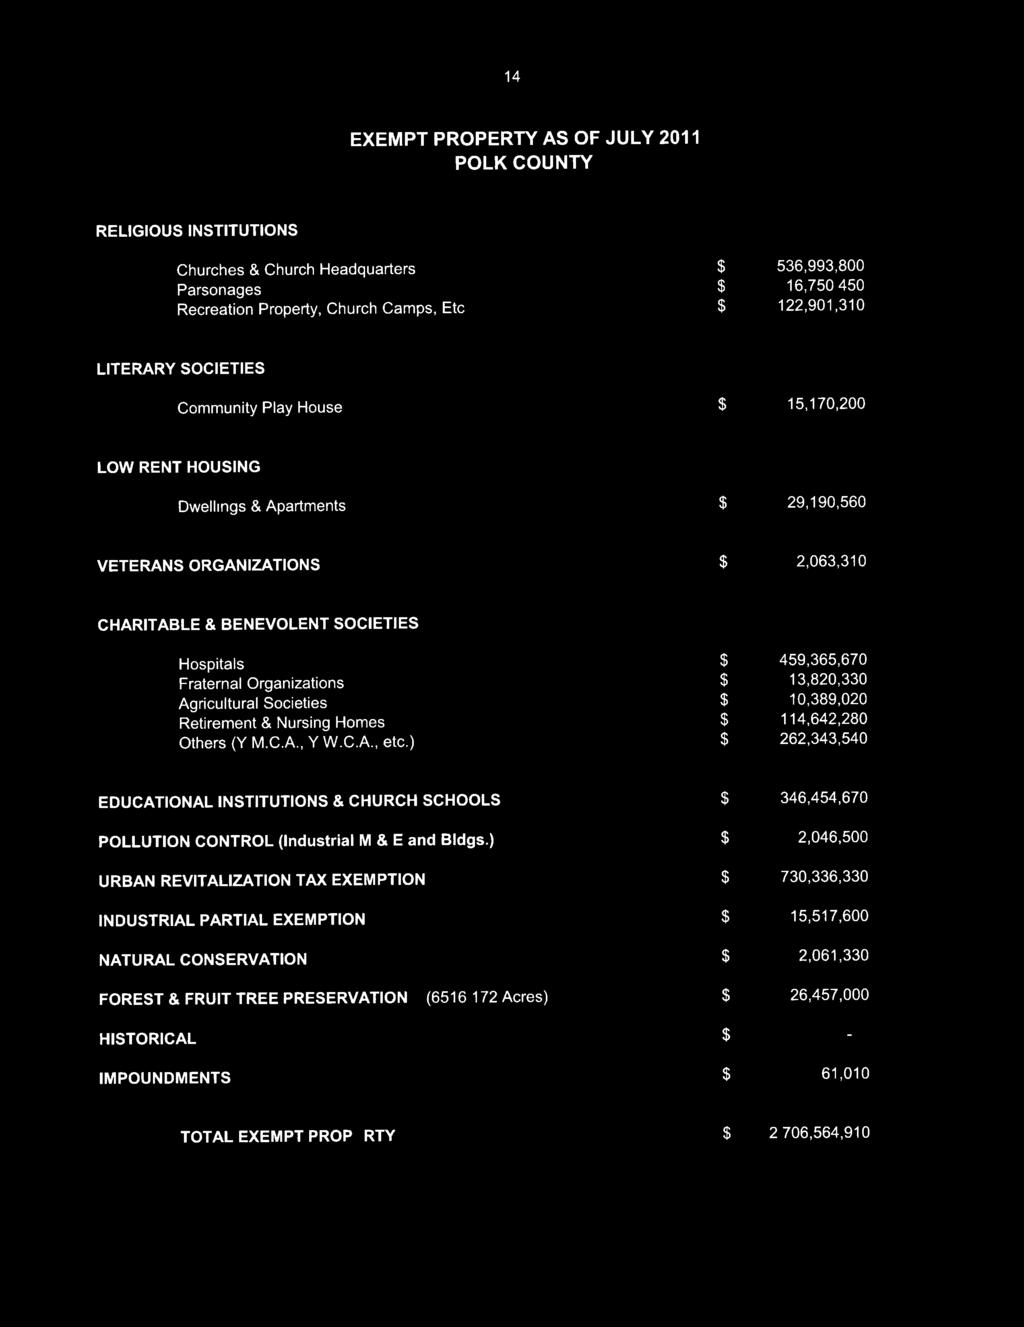 14 EXEMPT PROPERTY AS OF JULY 2011 POLK COUNTY RELIGIOUS INSTITUTIONS Churches & Church Headquarters $ 536,993,800 Parsonages $ 16,750,450 Recreation Property, Church Camps, Etc.